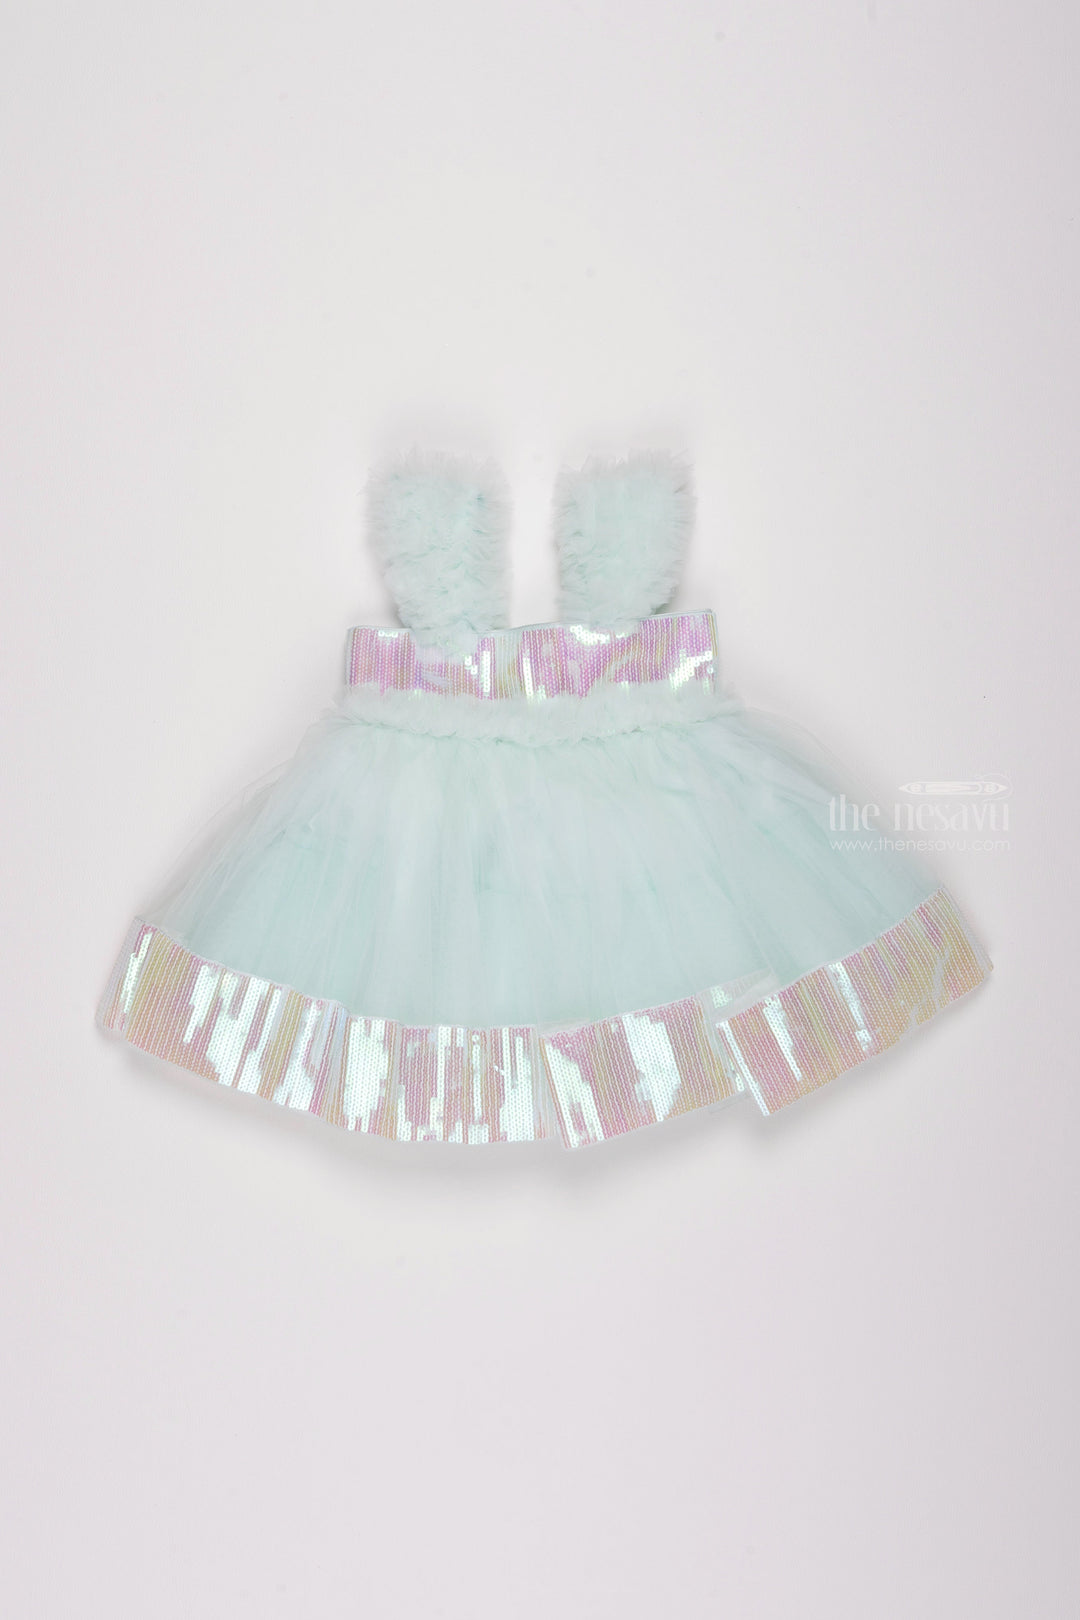 The Nesavu Girls Tutu Frock Azure Elegance: Dazzling Sequin-Embroidered Designer Party Frock for Girls Nesavu 16 (1Y) / Blue / Plain Net PF145A-16 Sophisticated Baby Party Dresses: Unique Birthday Frocks for Girls | The Nesavu